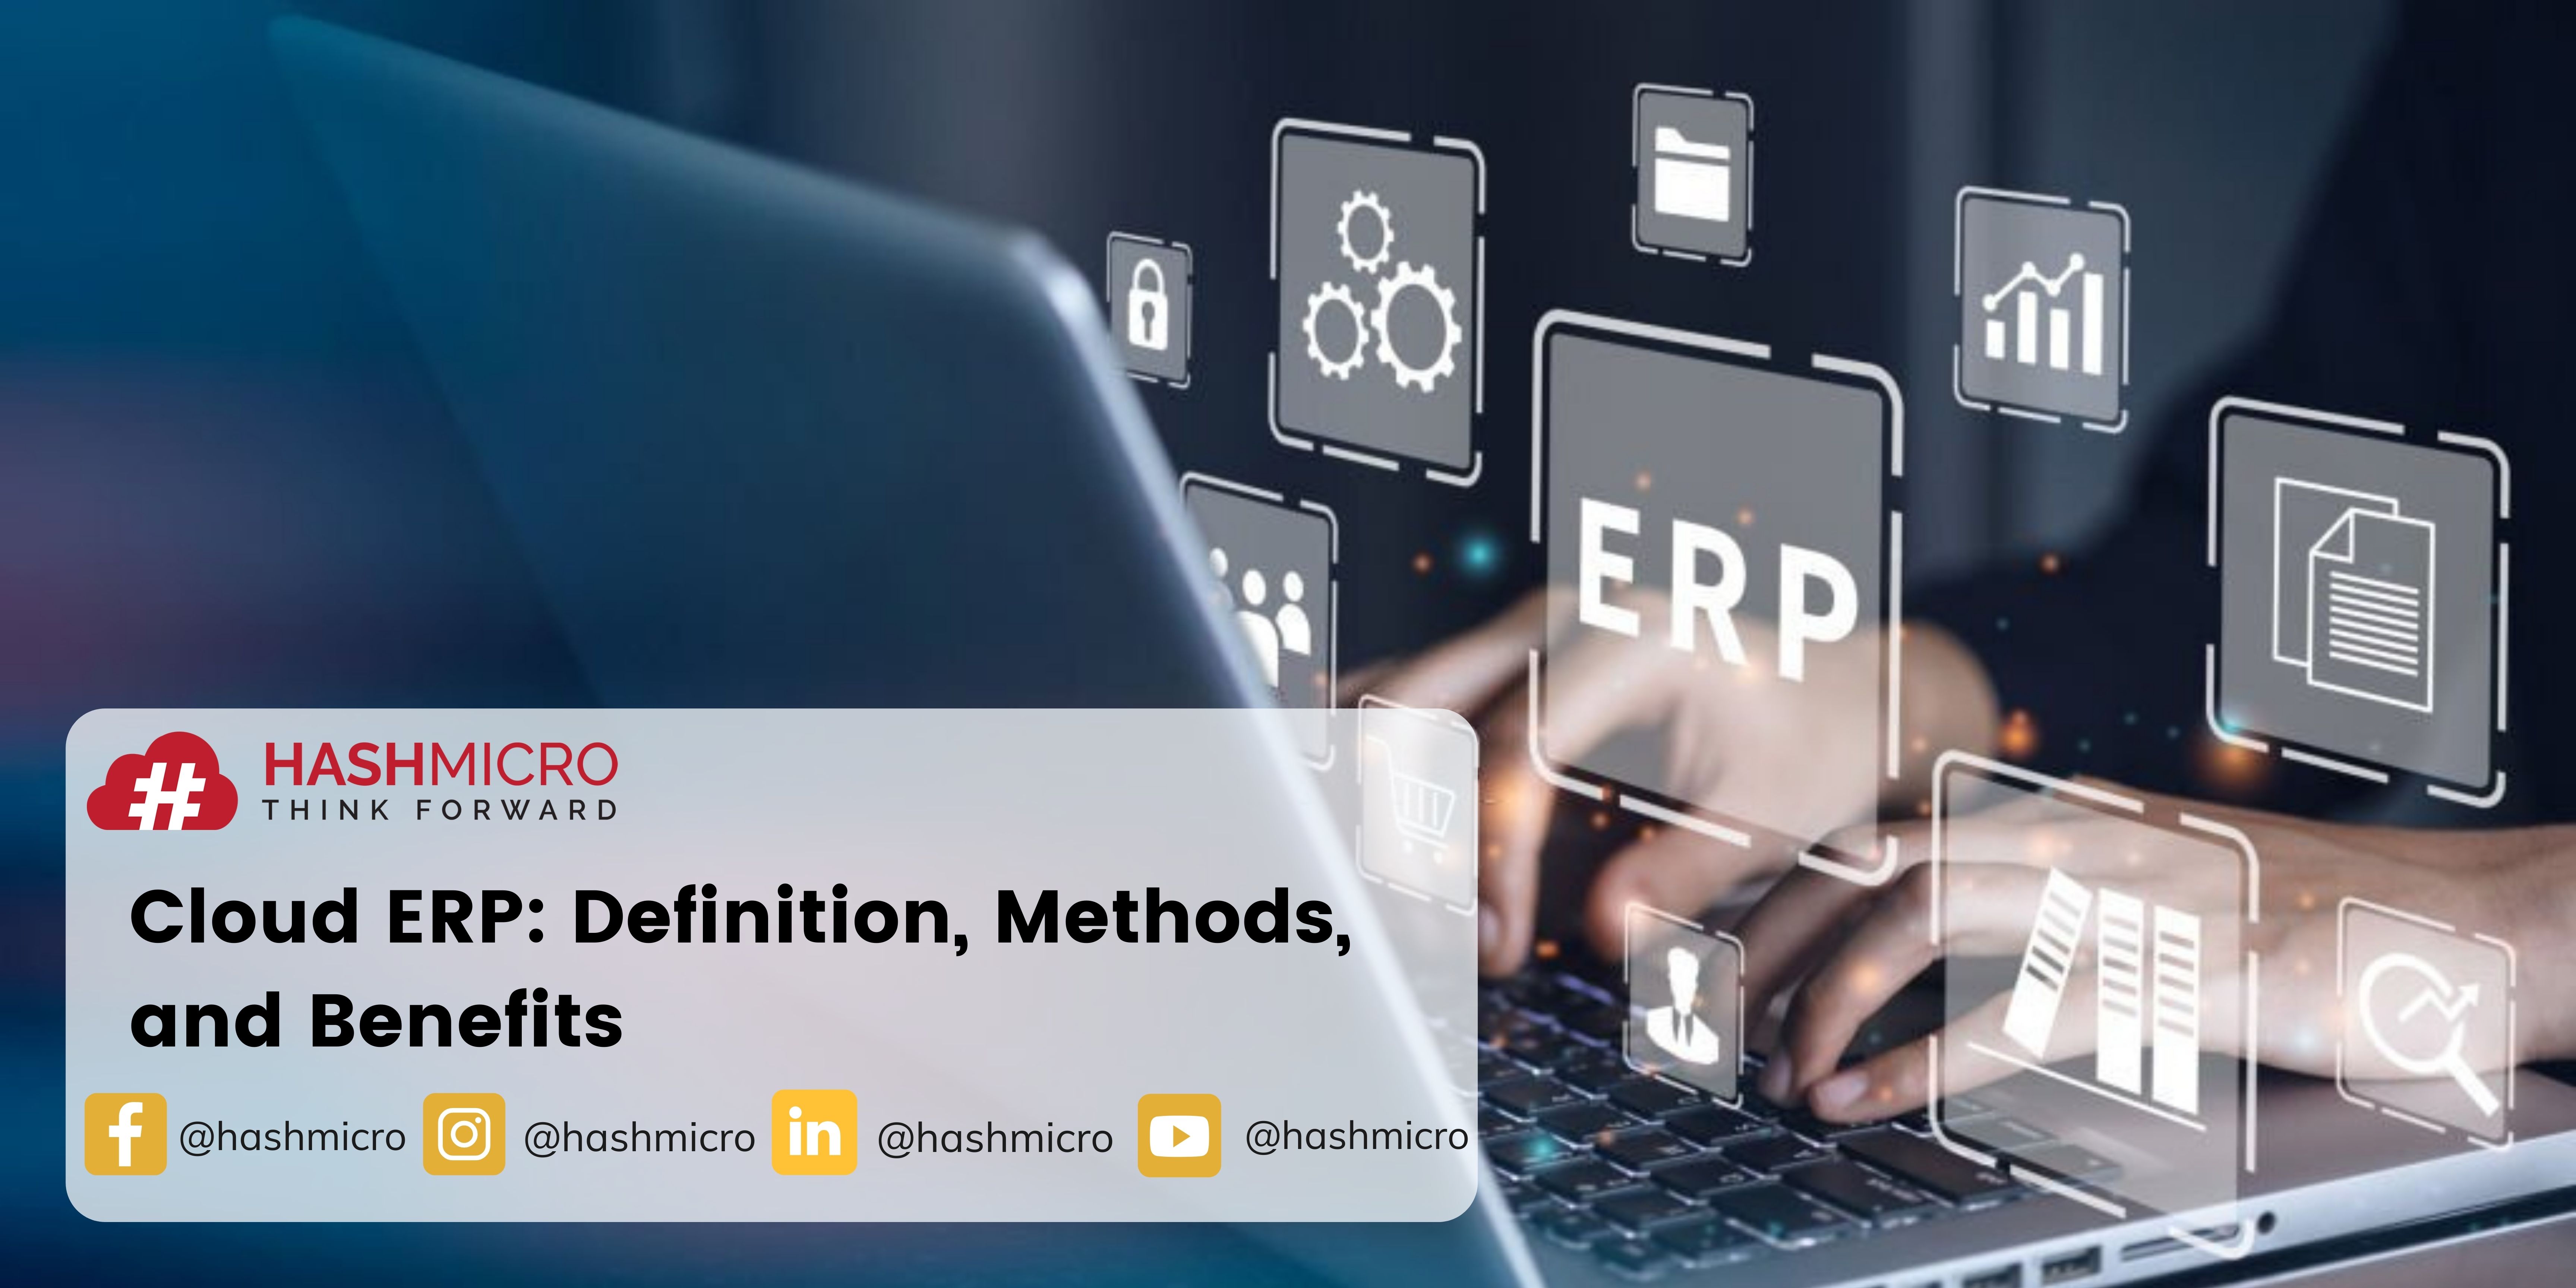 Cloud ERP: Definition, Methods, and Benefits